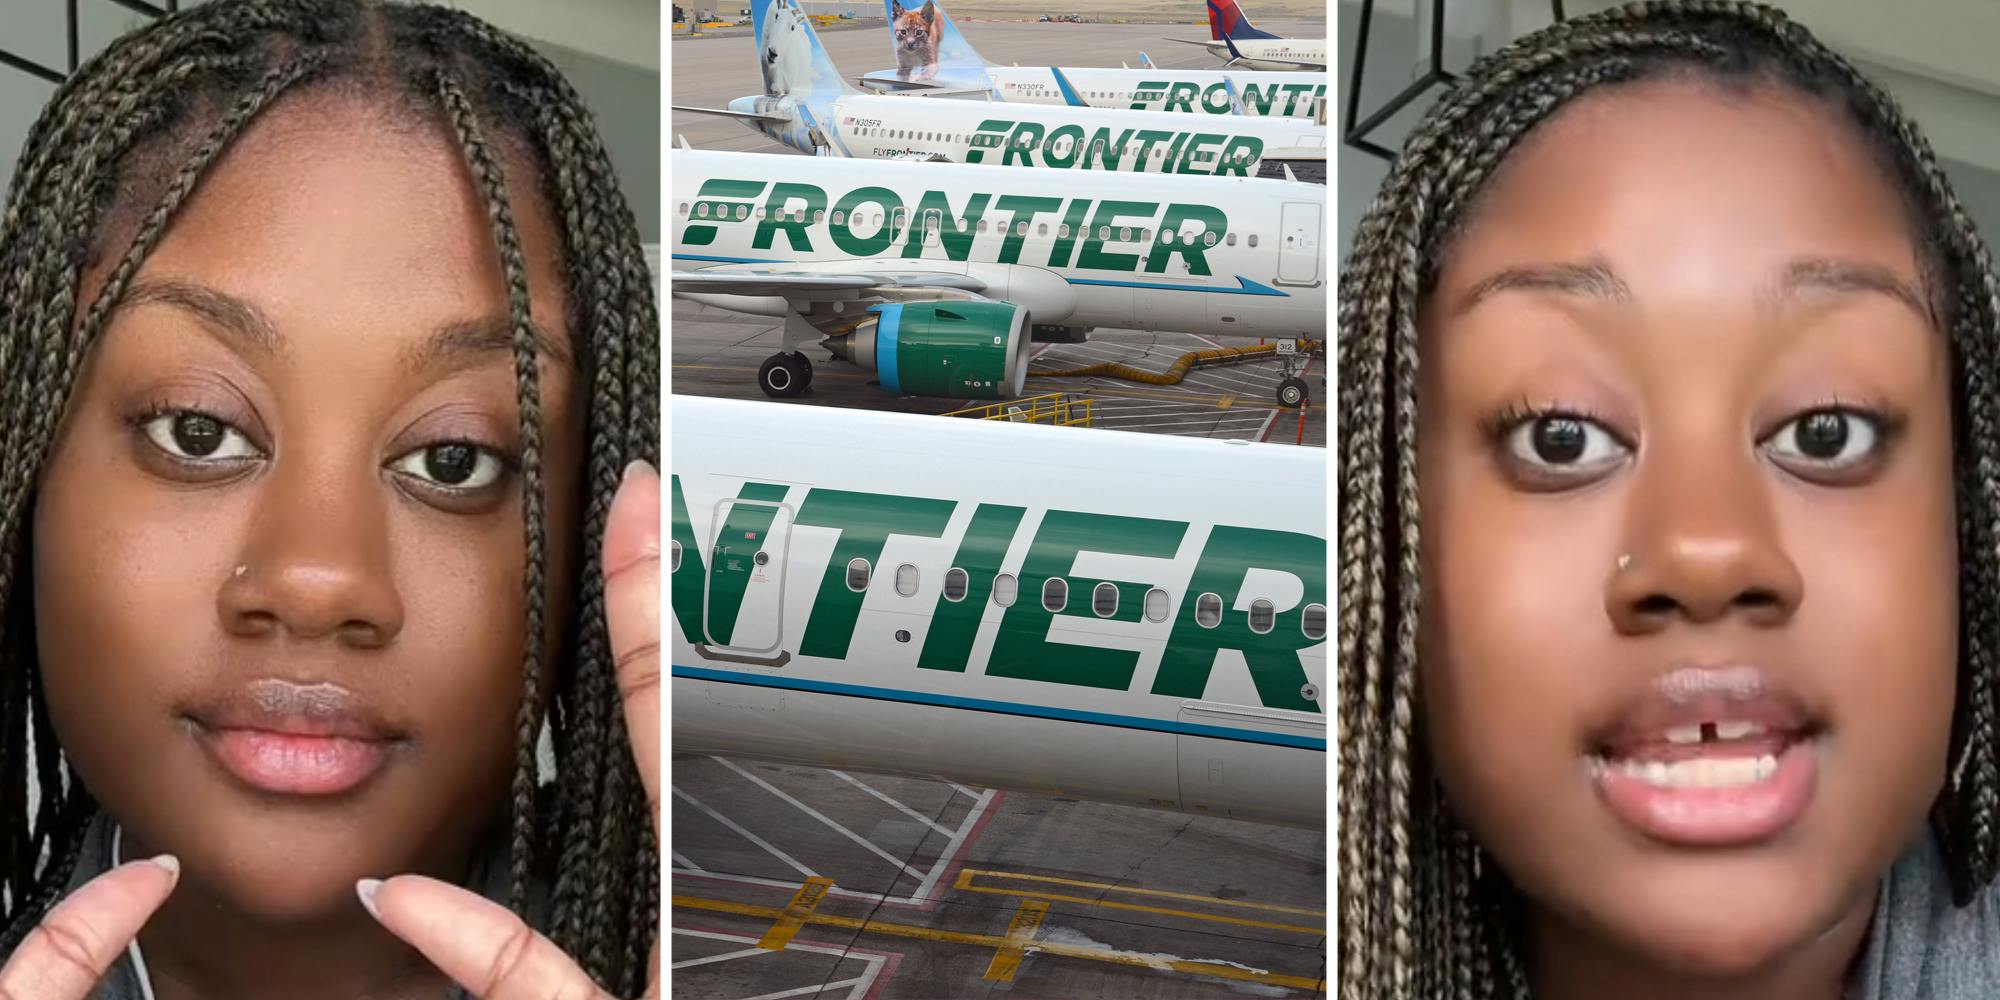 ‘I have spent an excess of $1,000’: Frontier customer says she was removed from her return flight without consent. She’s stuck in Jamaica with a category 5 hurricane on the way